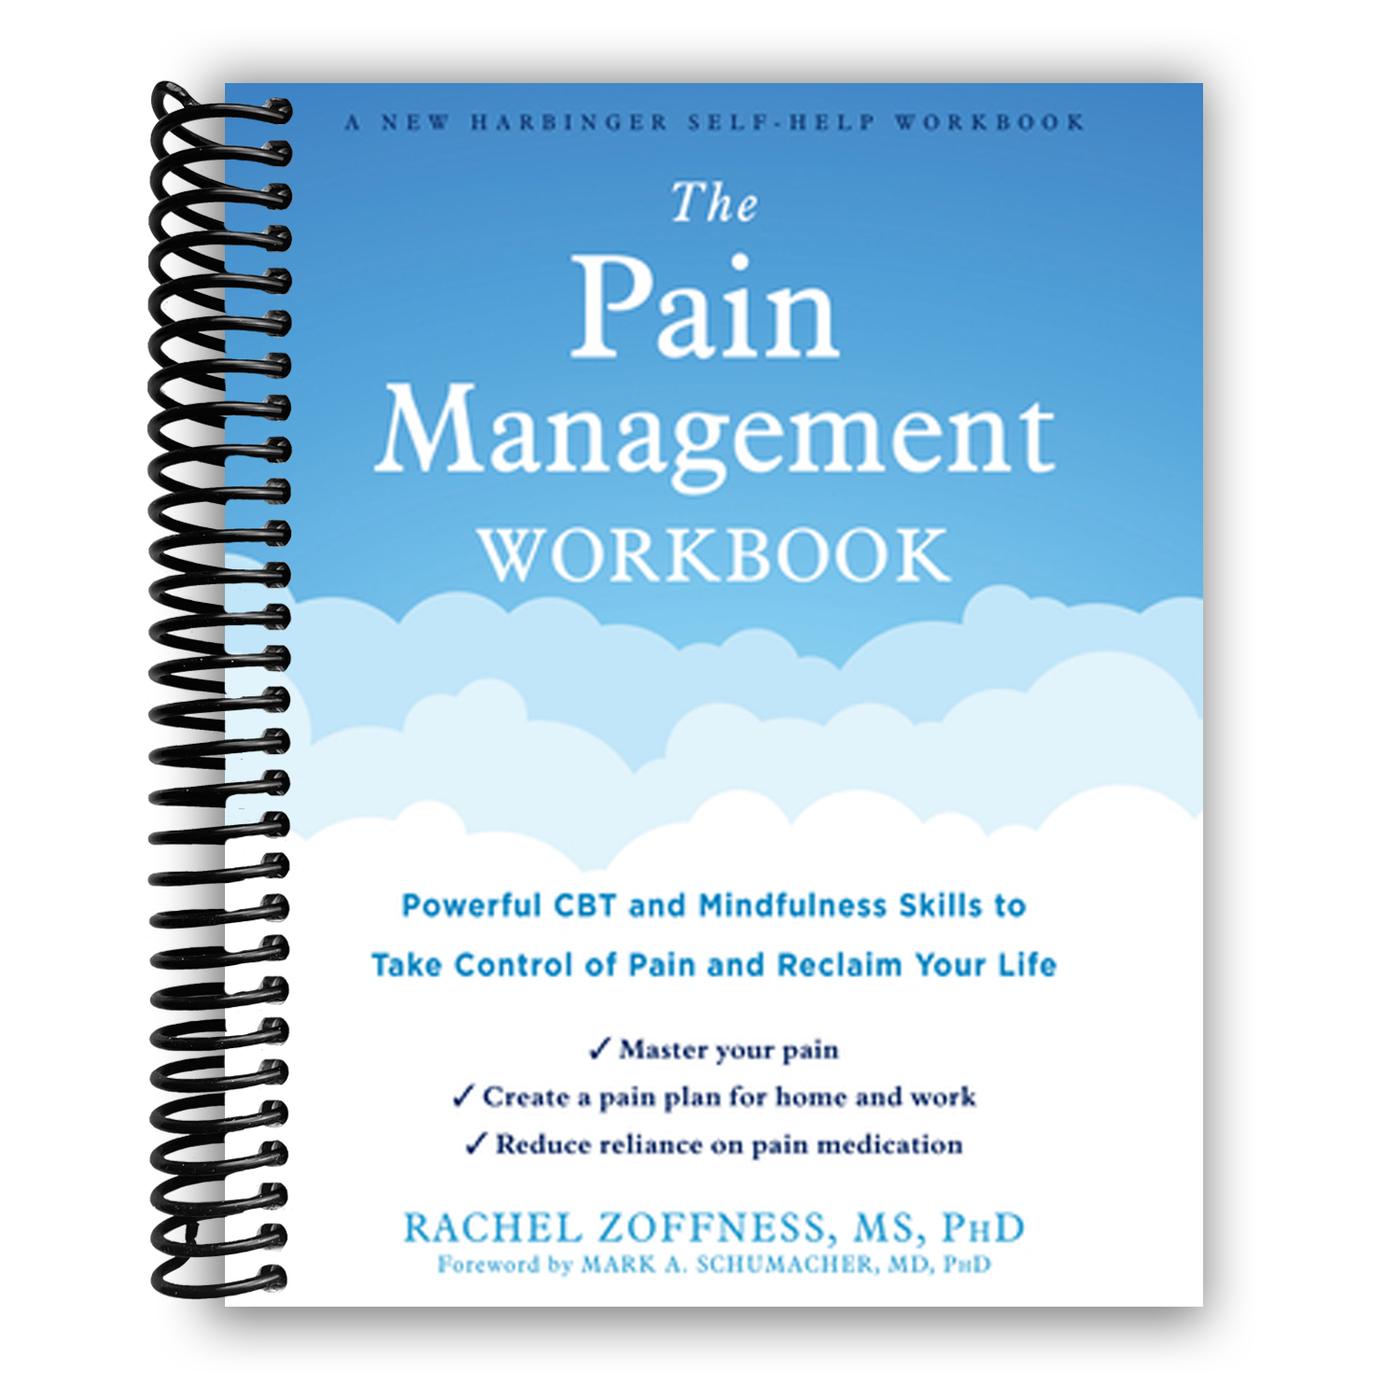 The Pain Management Workbook: Powerful CBT and Mindfulness Skills to Take Control of Pain and Reclaim Your Life(Spiral Bound)